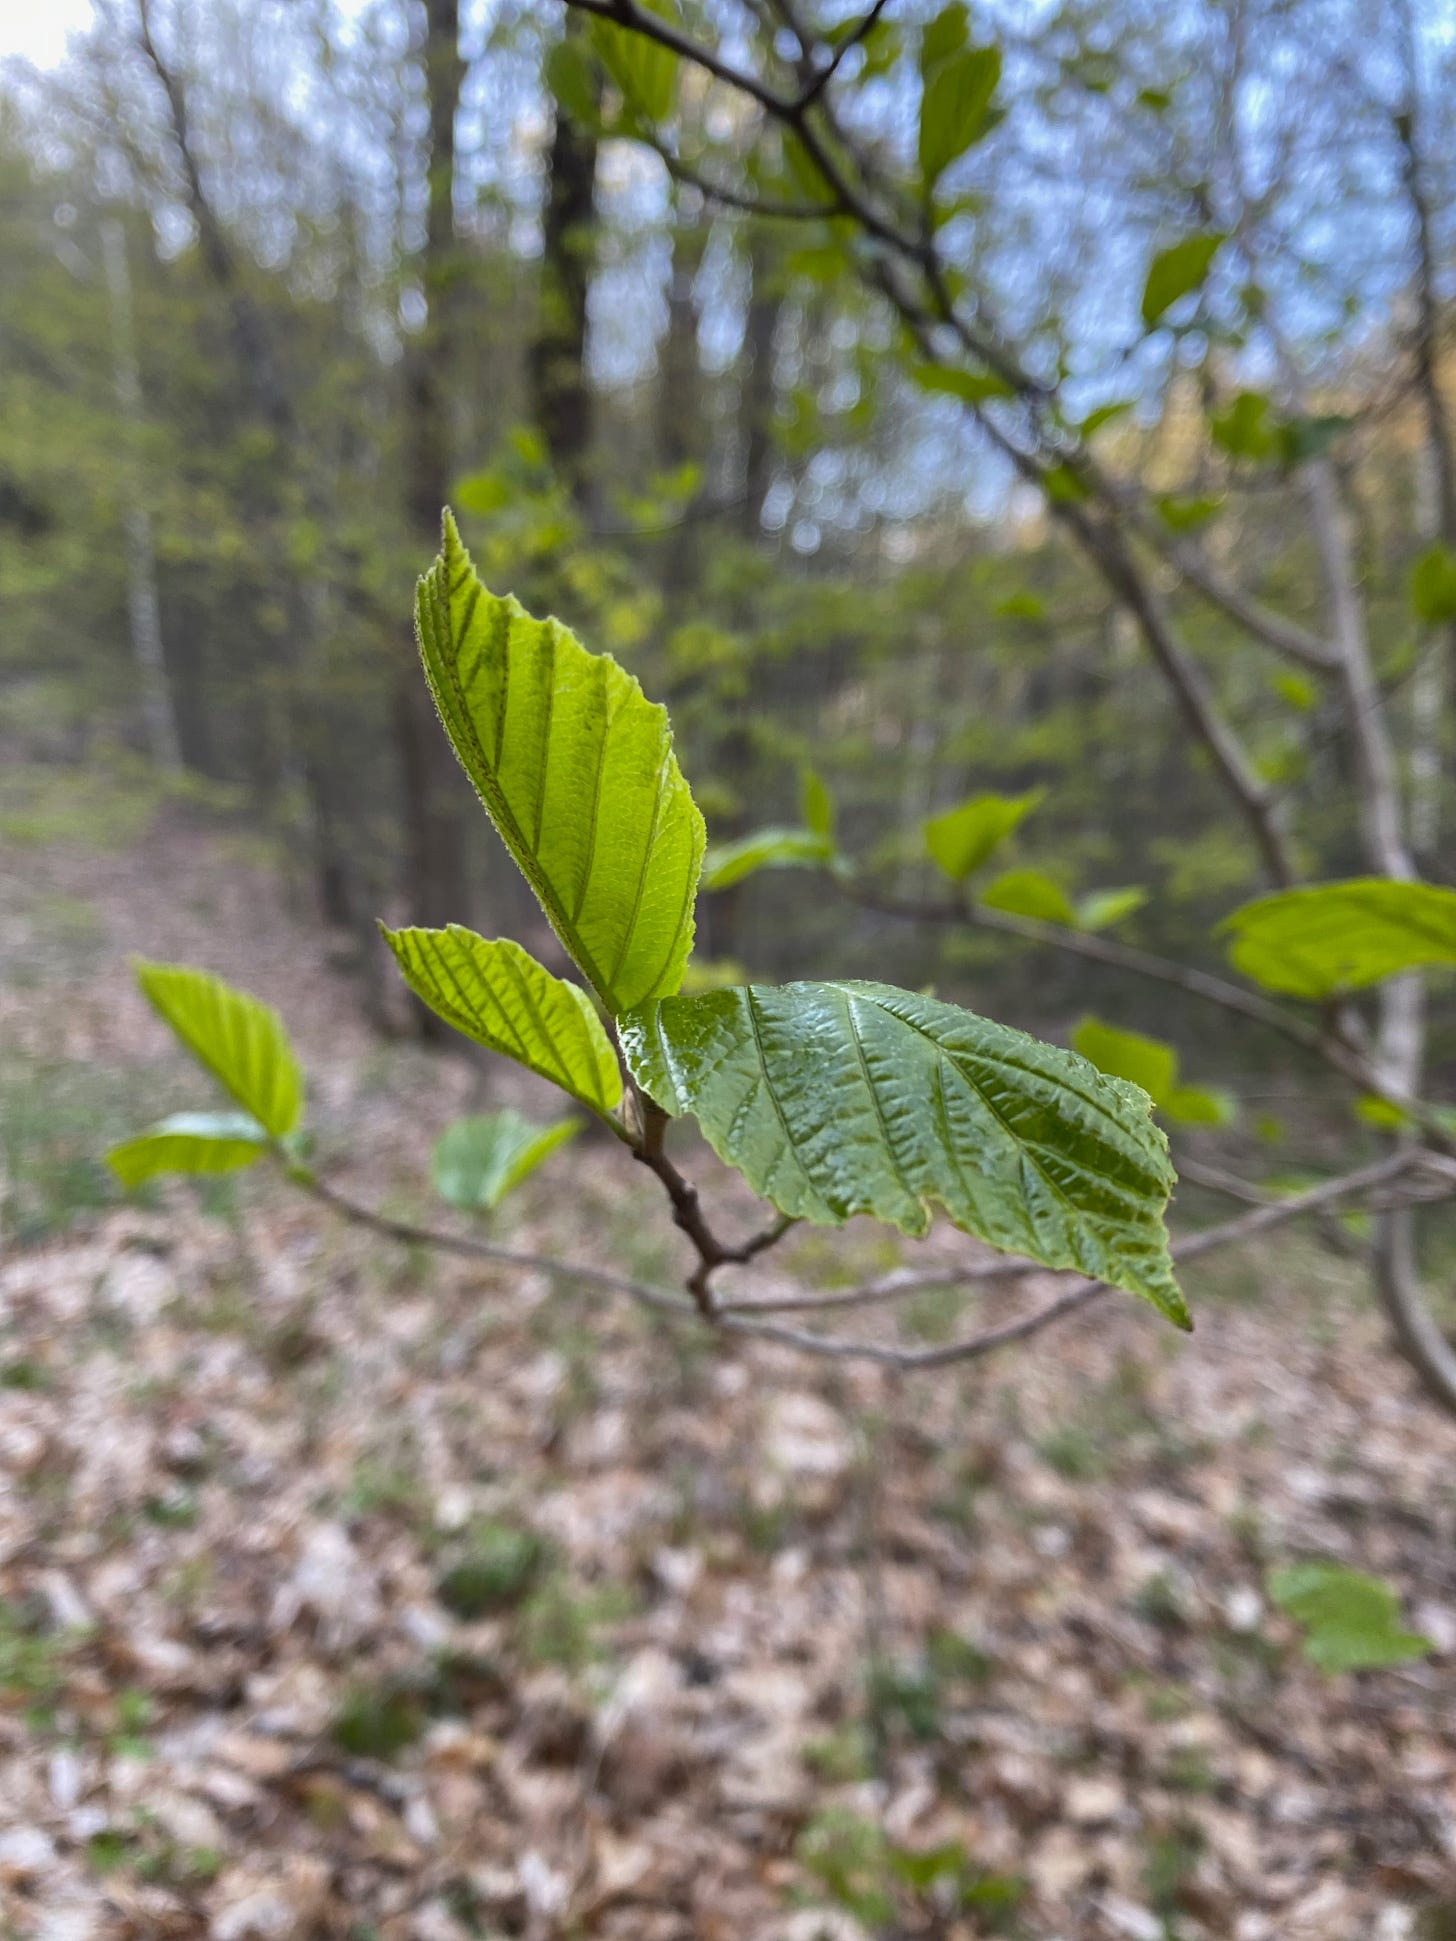 Closeup of a twig of small, bright green beech leaves in various stages of unfurling.